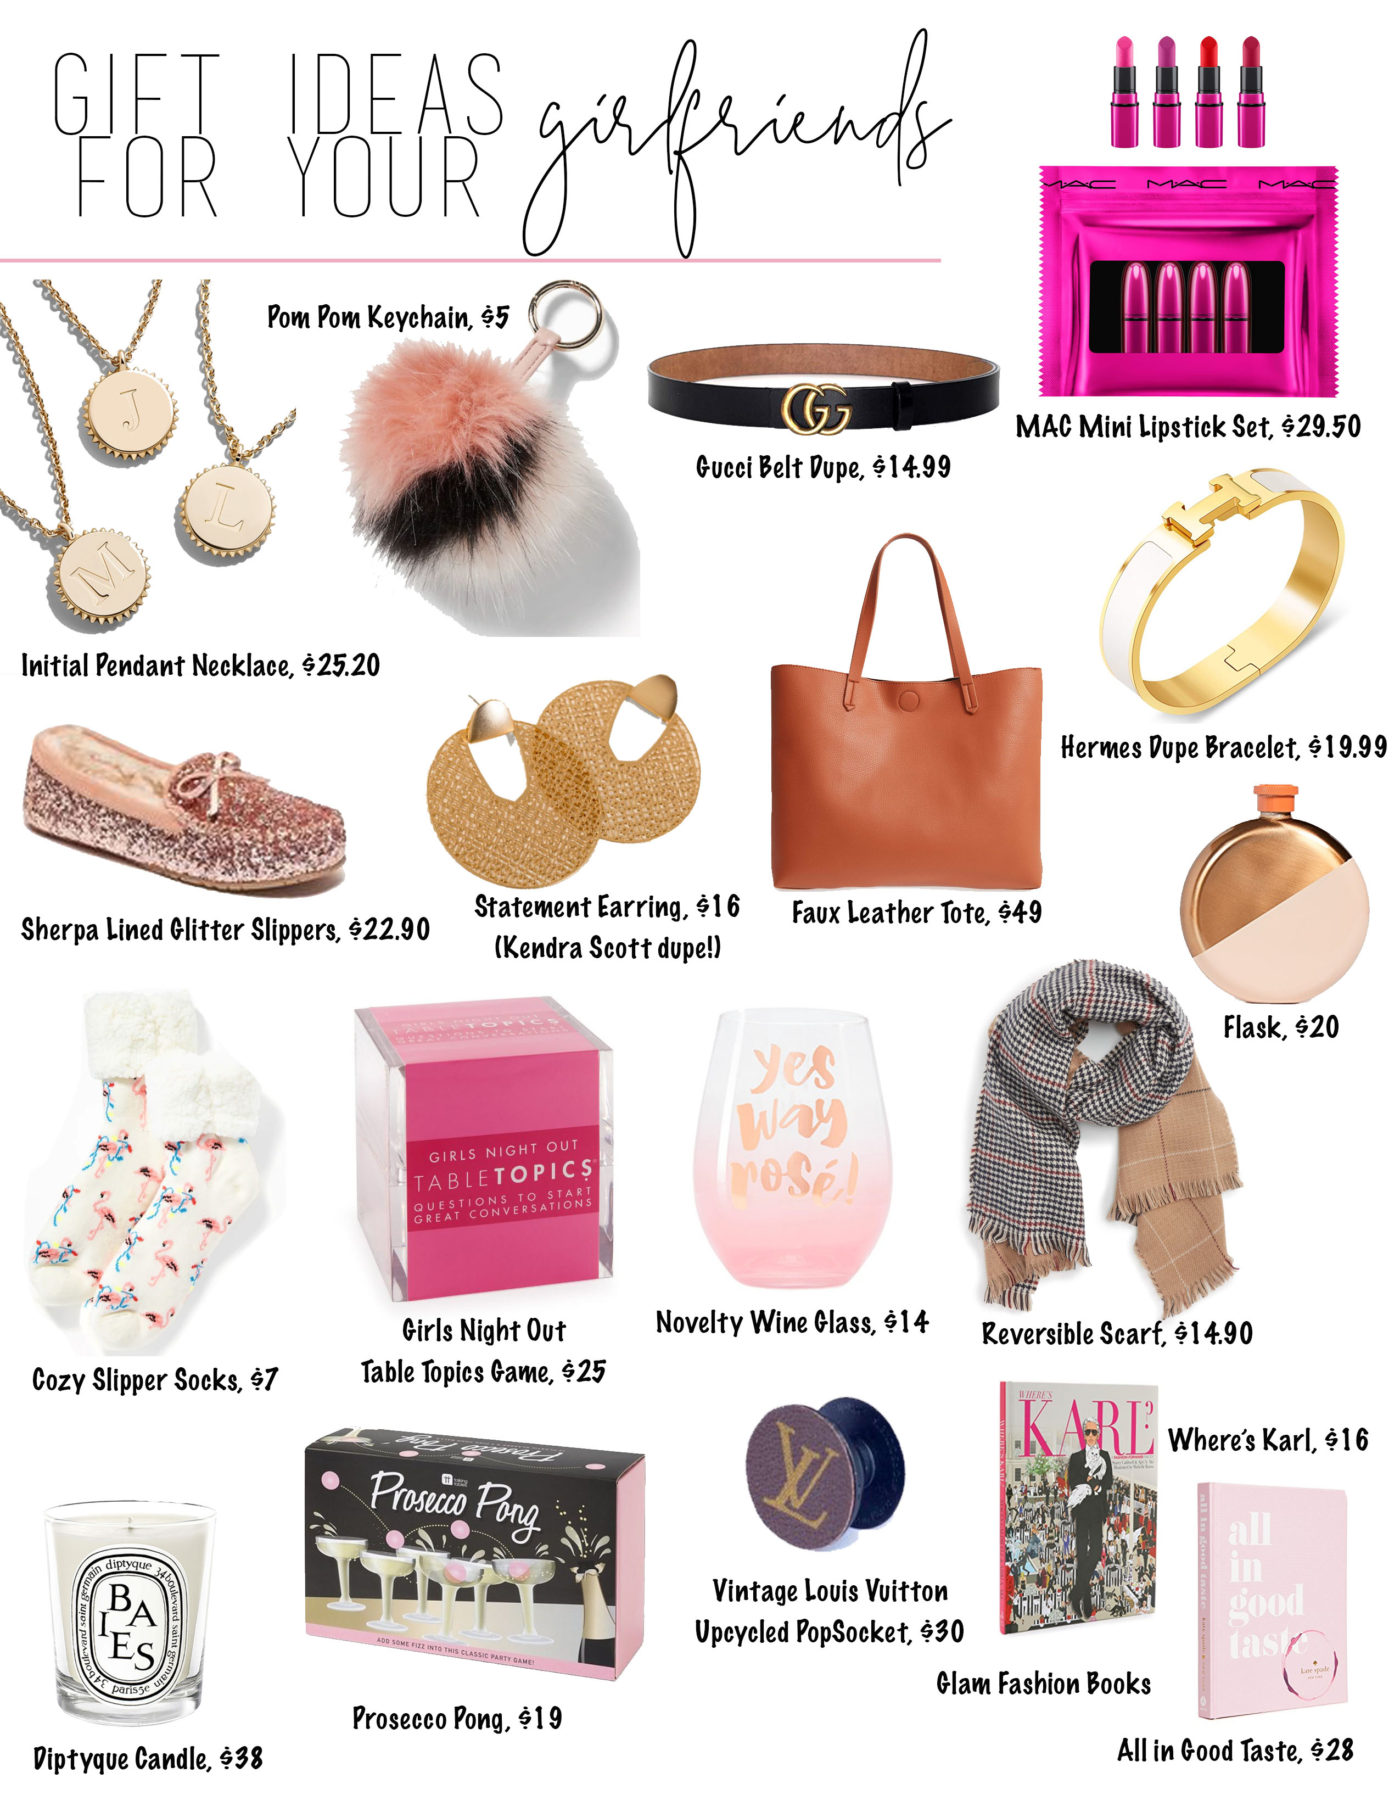 Holiday Gift Guide 2018 – Gifts Ideas for Women – gifts for your girlfriends